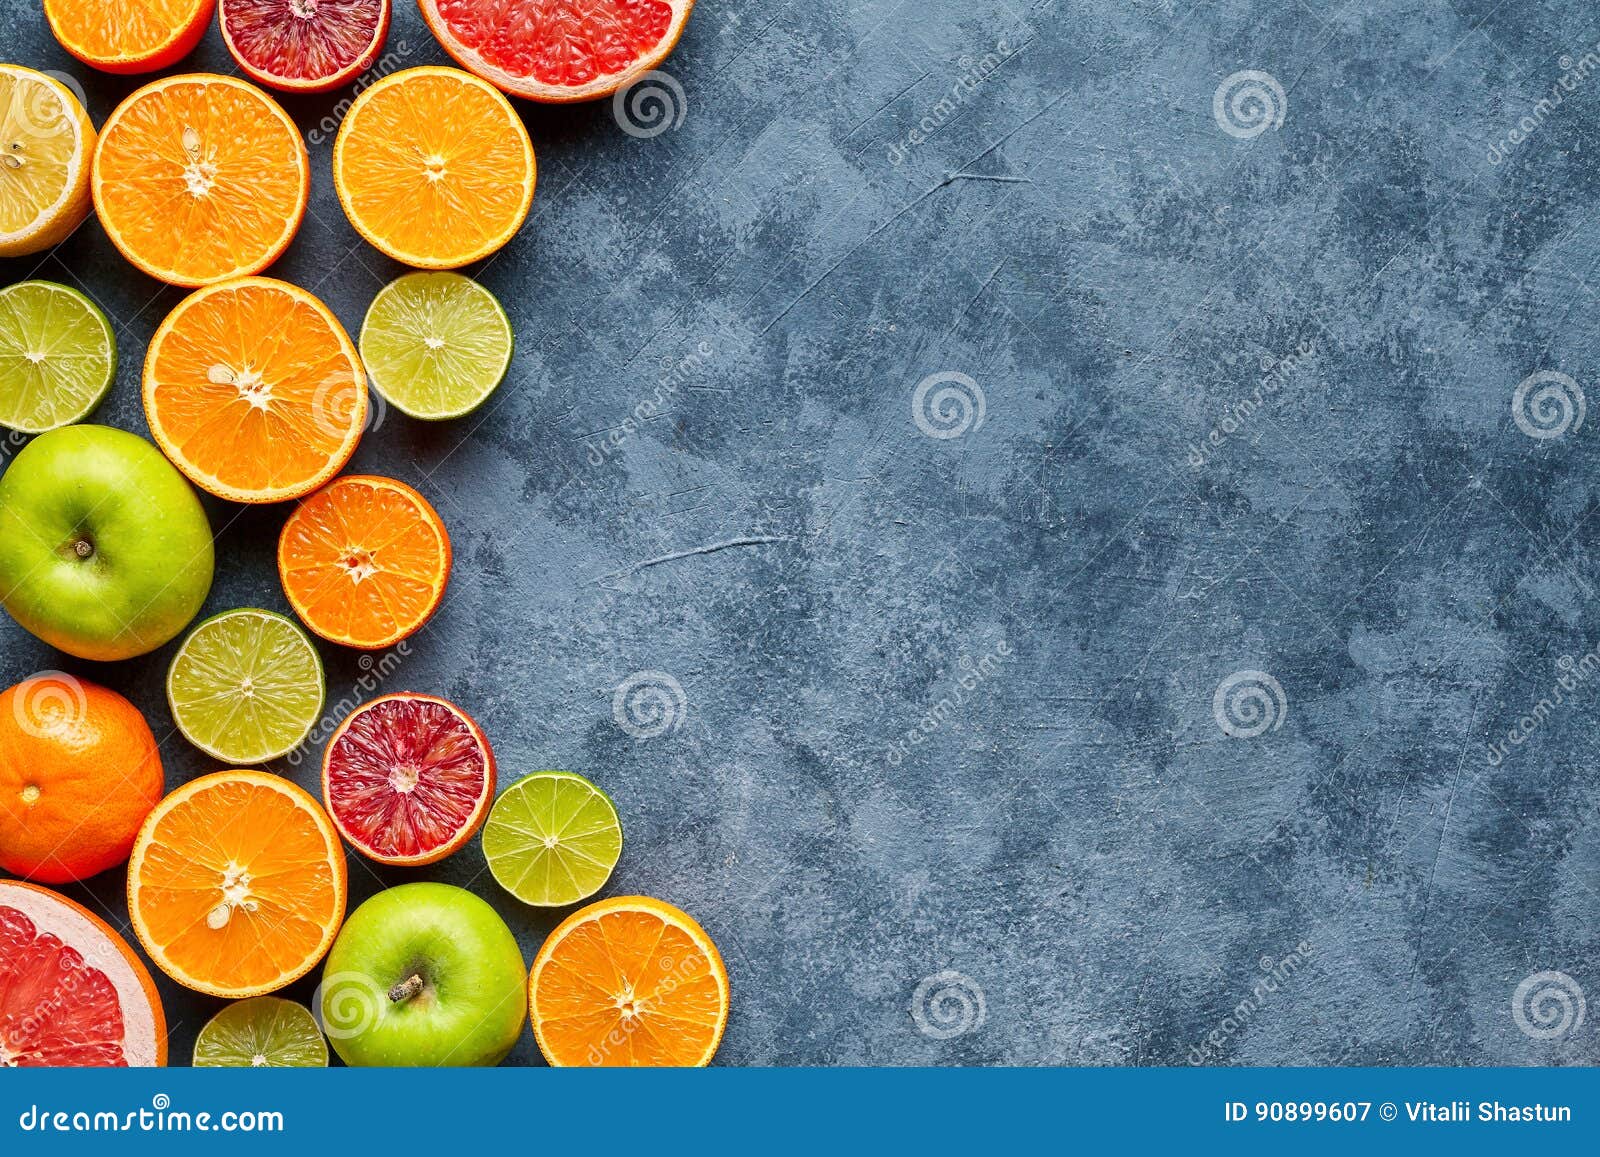 citrus fruit mix on dark grey concrete table. food background. healthy eating. antioxidant, detox, dieting, clean eating